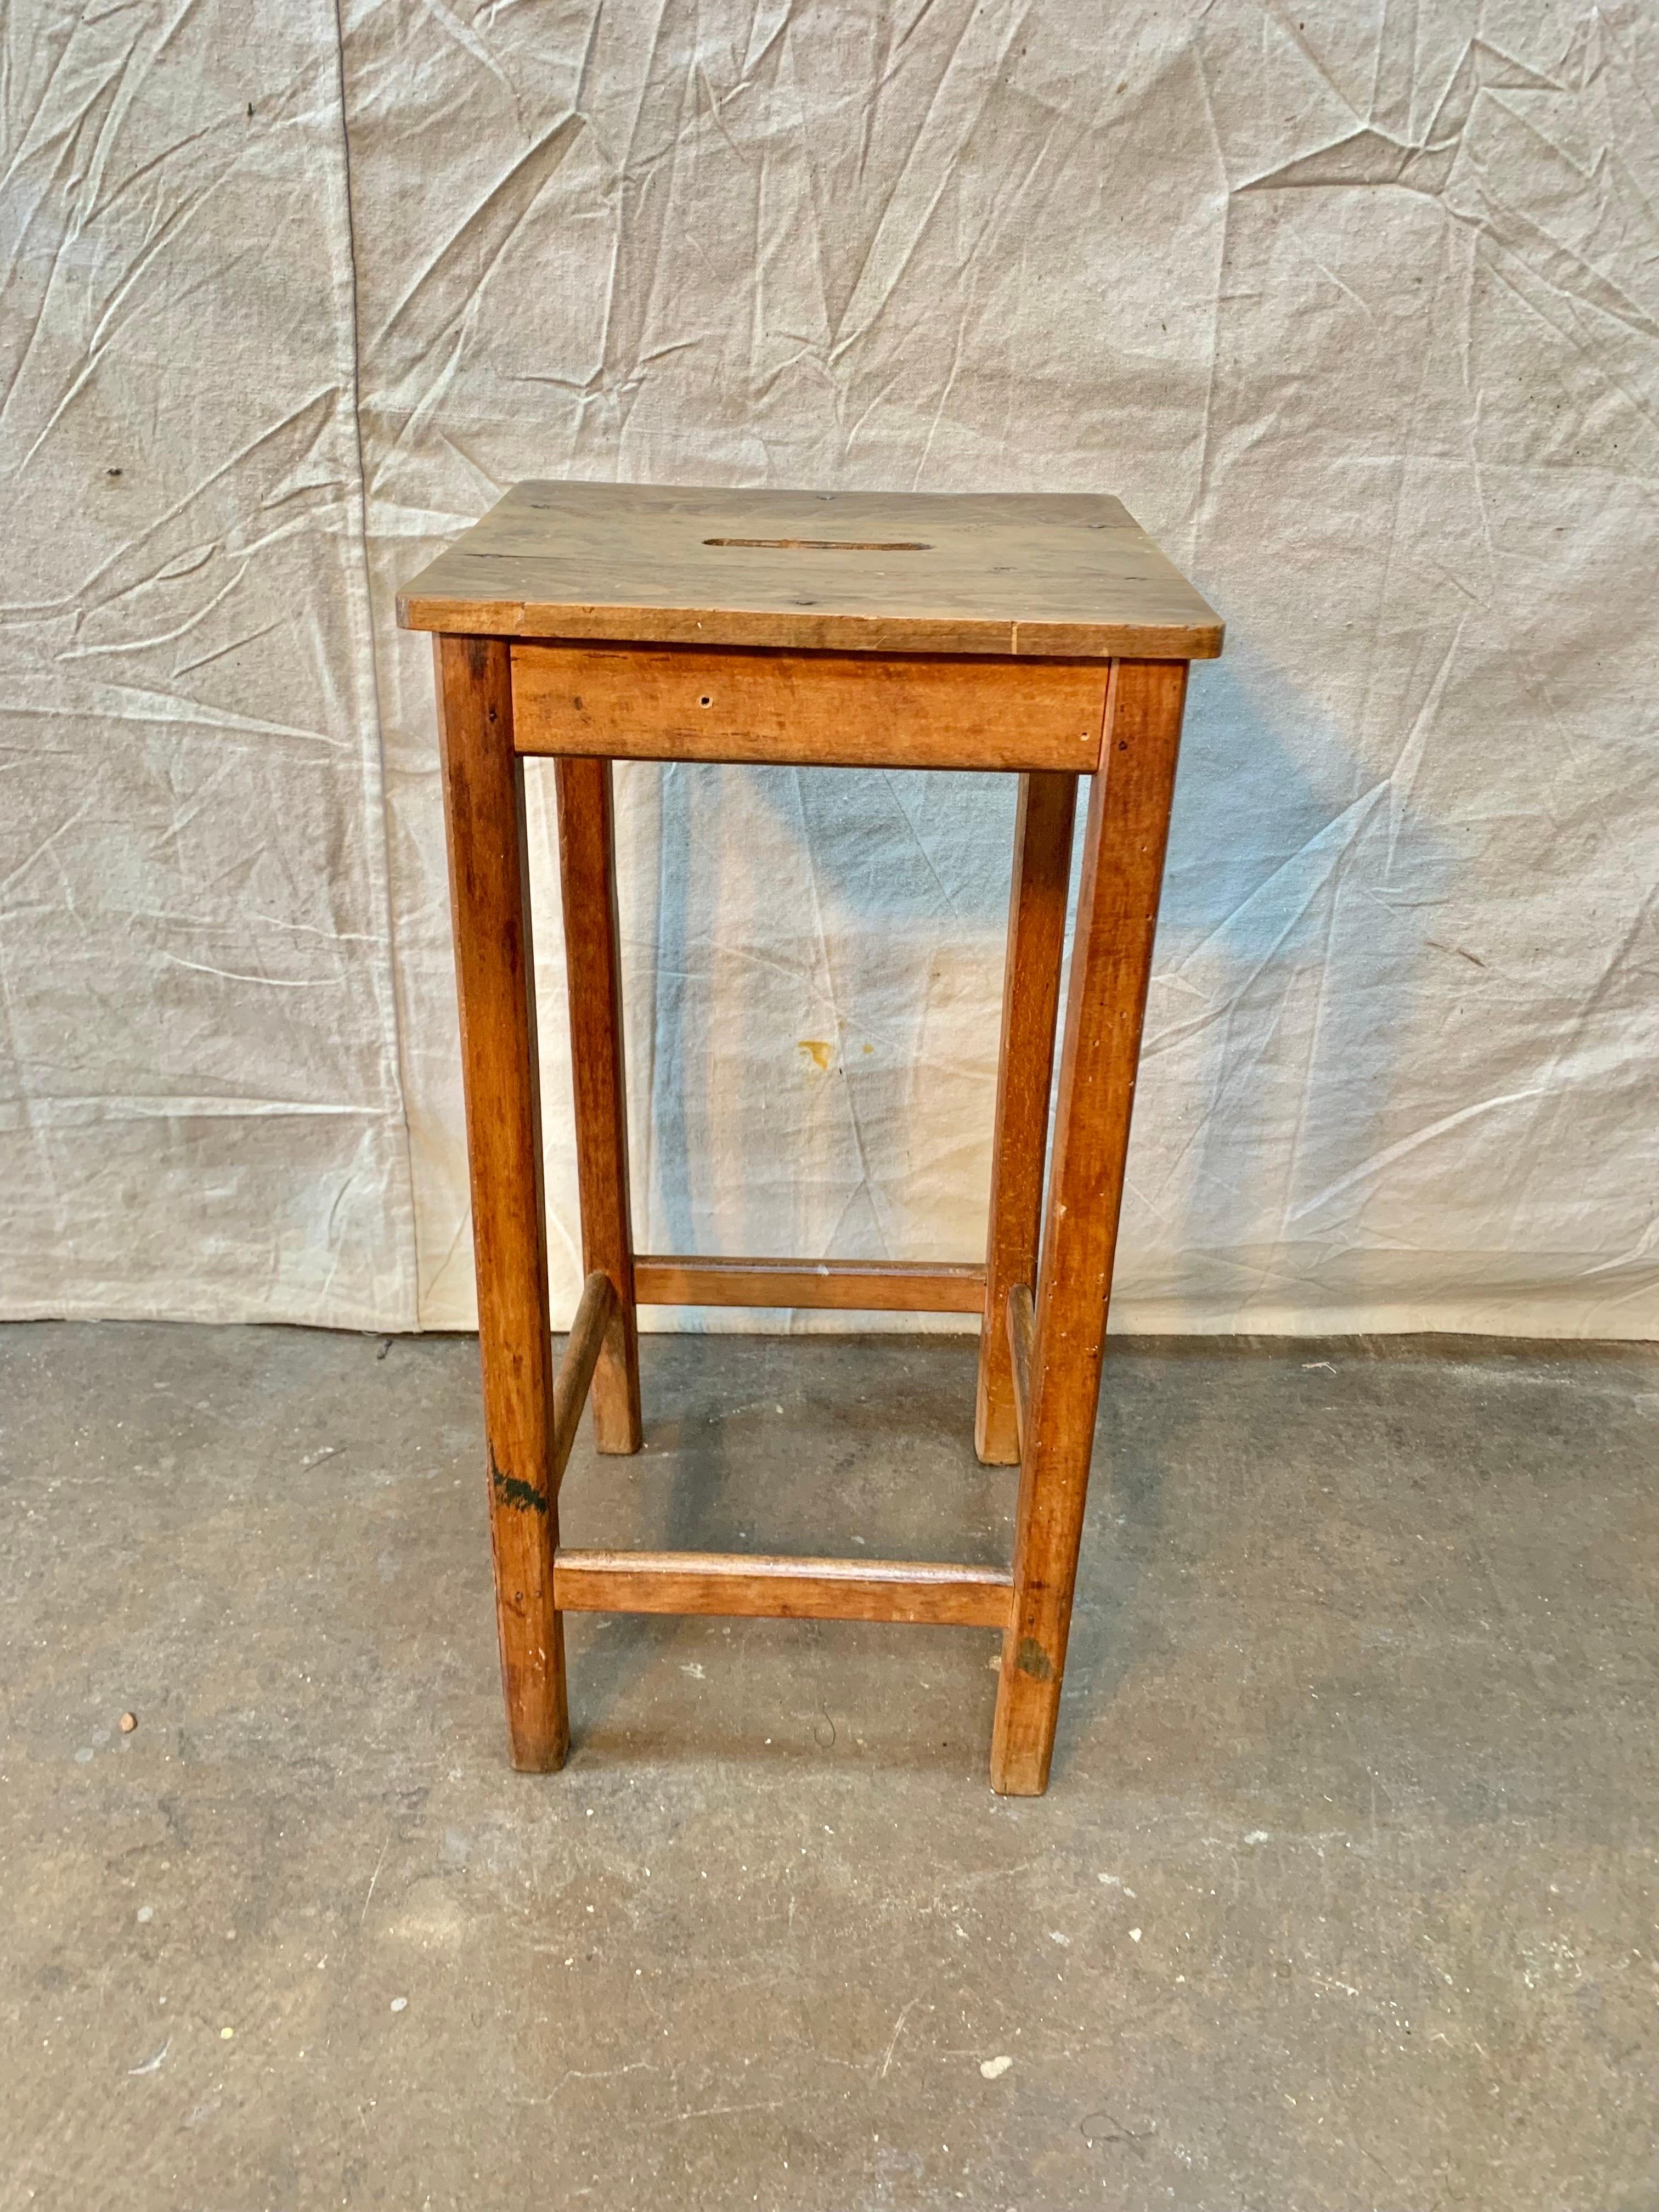 Found in France, this Early 1900s French Pine Train Station Stool features a finger hold in the top for easy transport.  The size of the piece lends it to be used as a stool or a side table beside a chair.  Well made and solid, great lines and